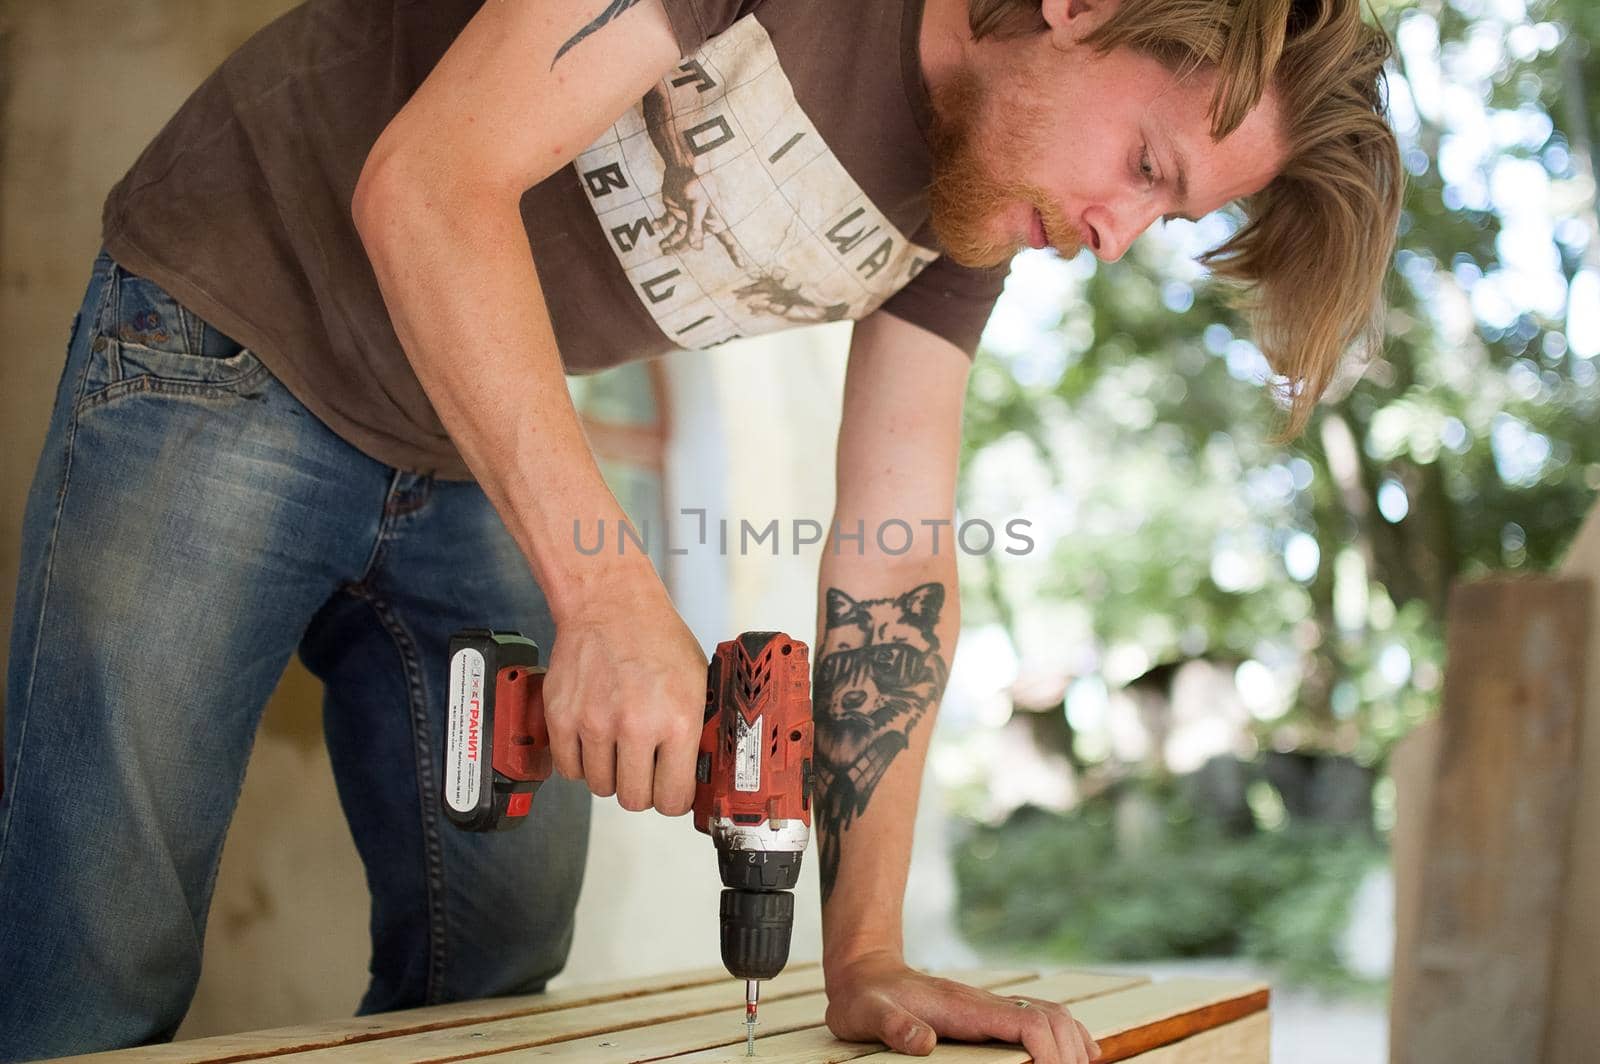 13.08.2021 - Ukraine, Goshcha, voluntary event, skilled young male worker is using power screwdriver drilling during construction wooden bench, do it yourself.